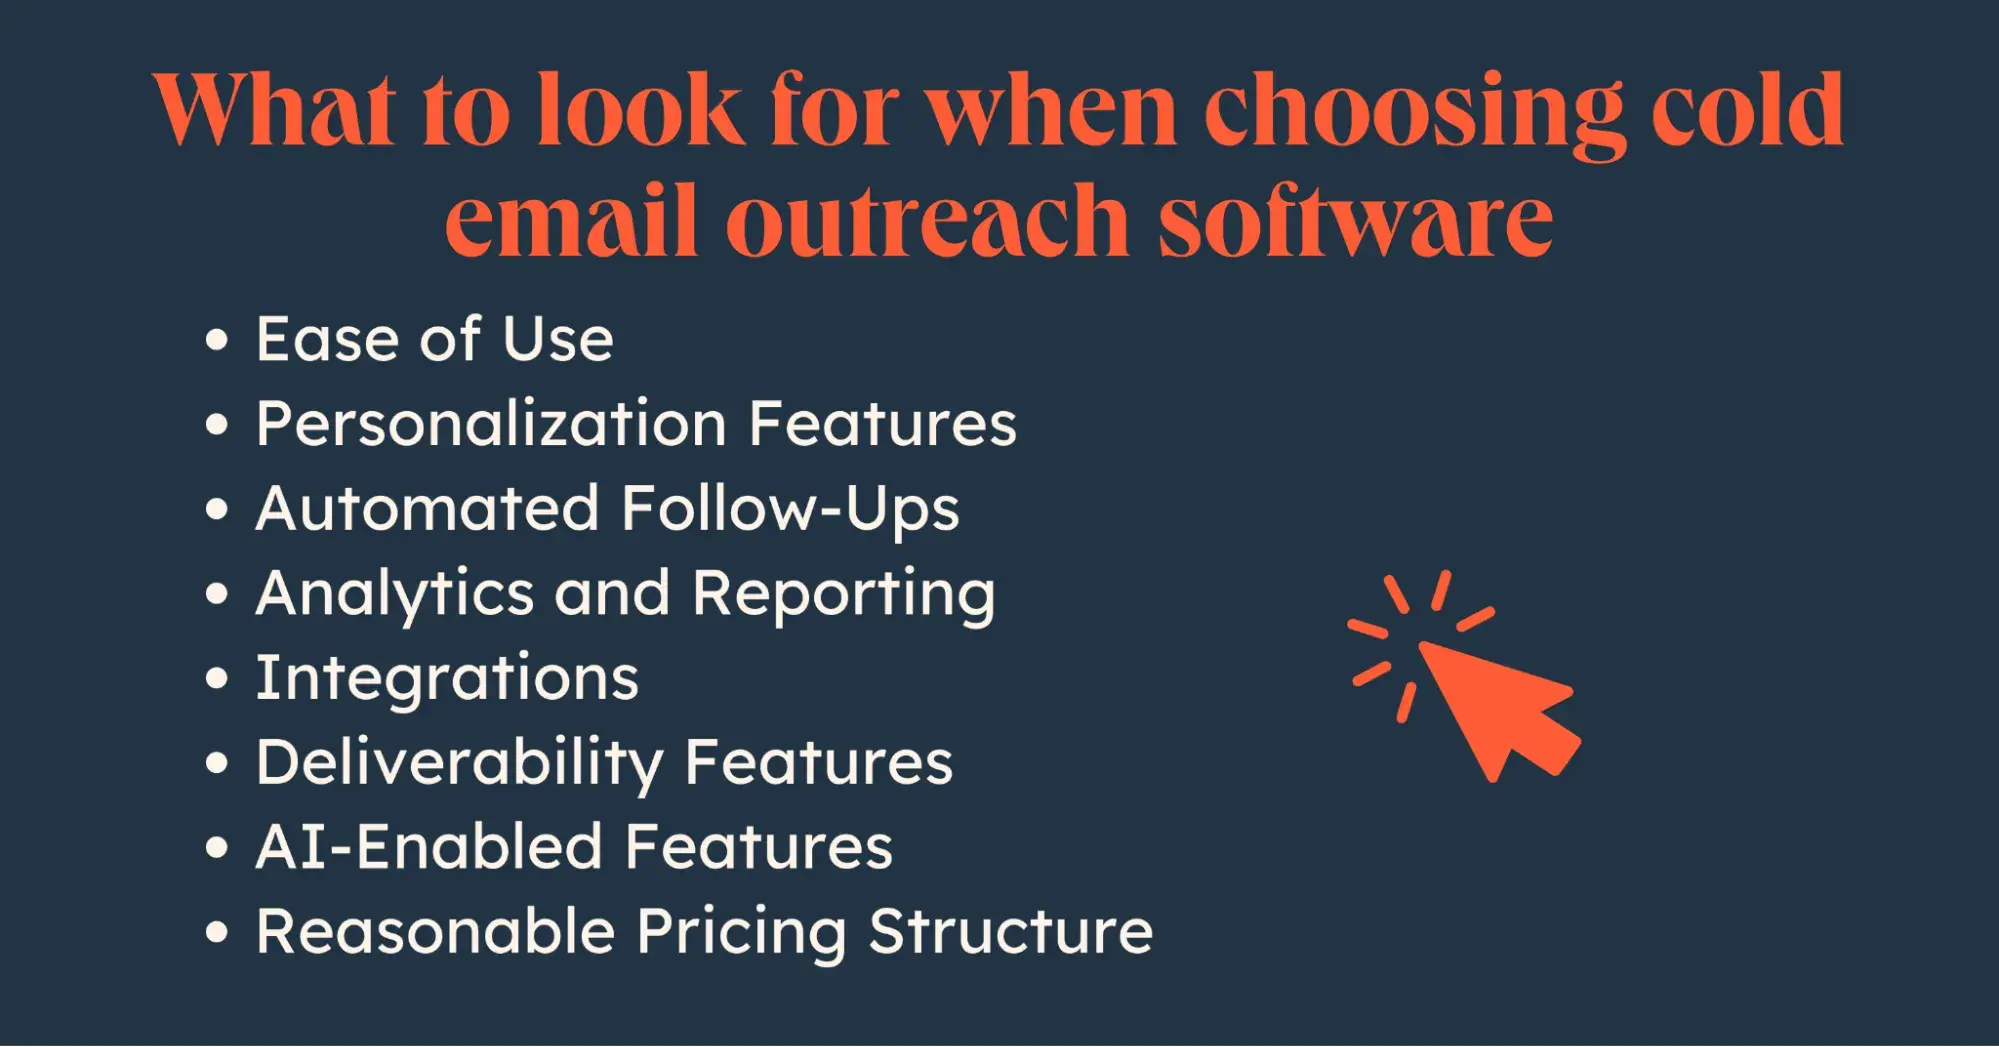 list of what to look for when choosing cold email outreach software